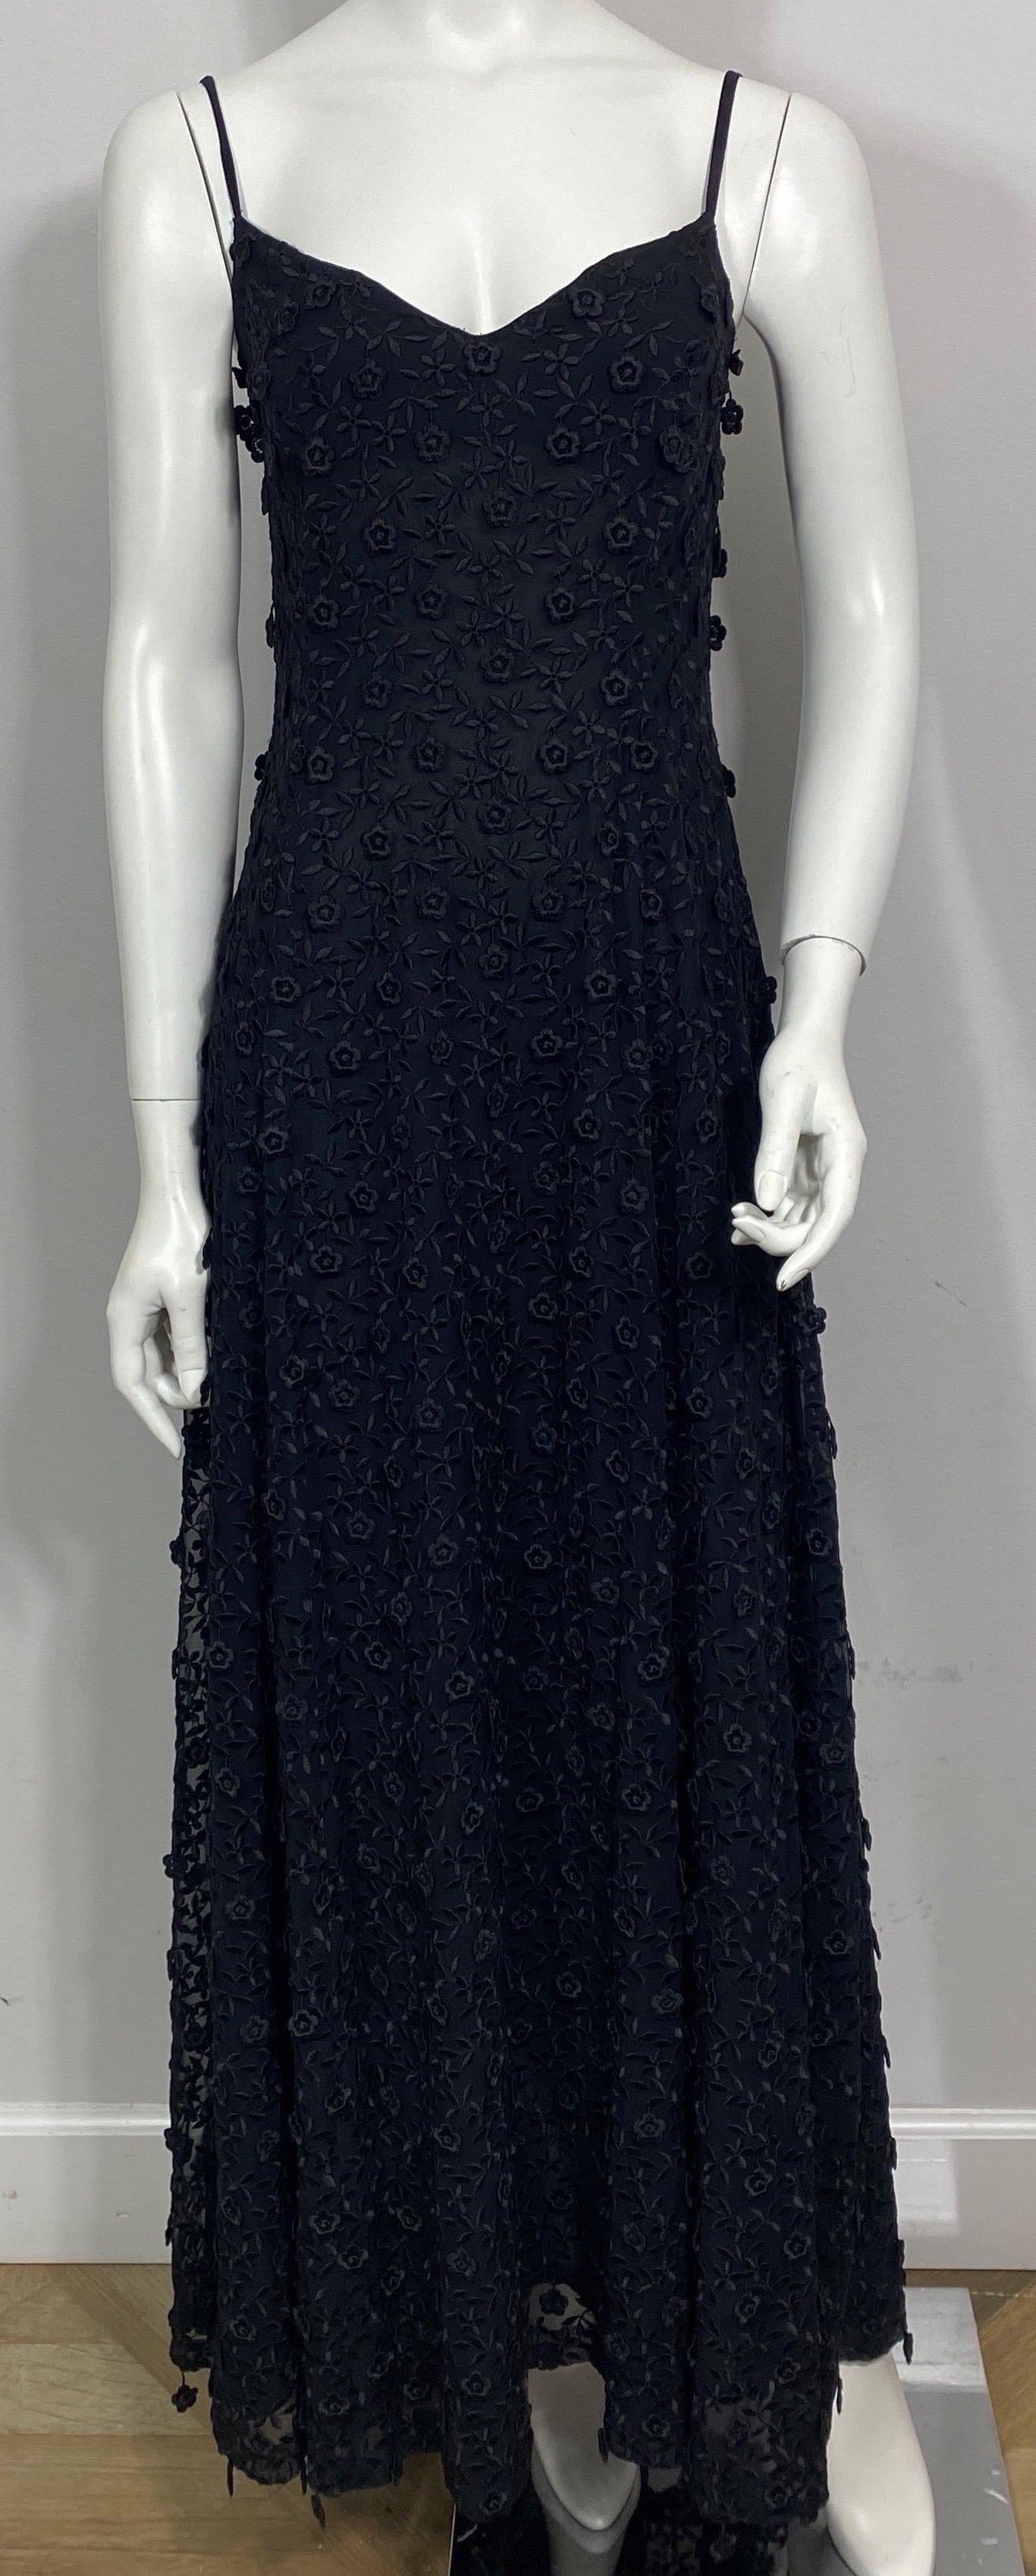 Escada Couture 1990’s Black Embroidered Applique Gown-Size 36 For Sale